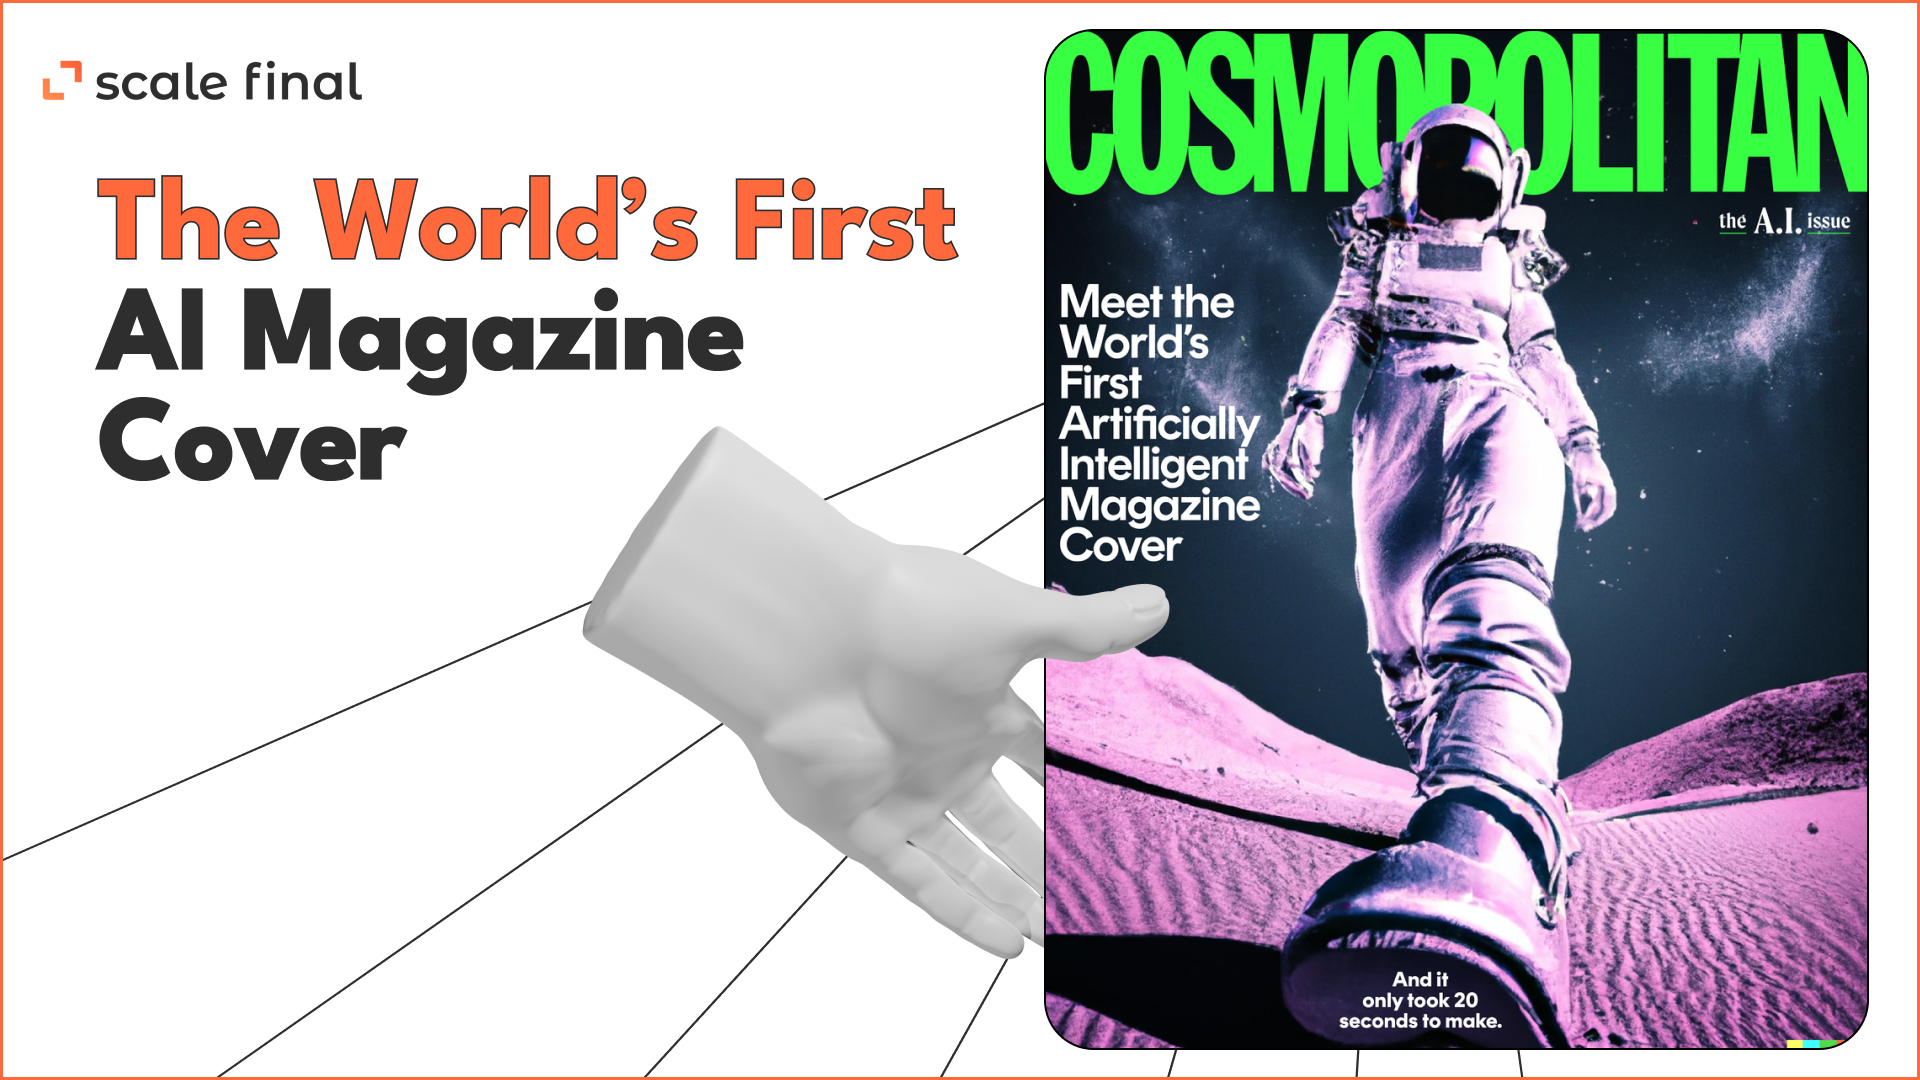 The World’s First AI Magazine Cover